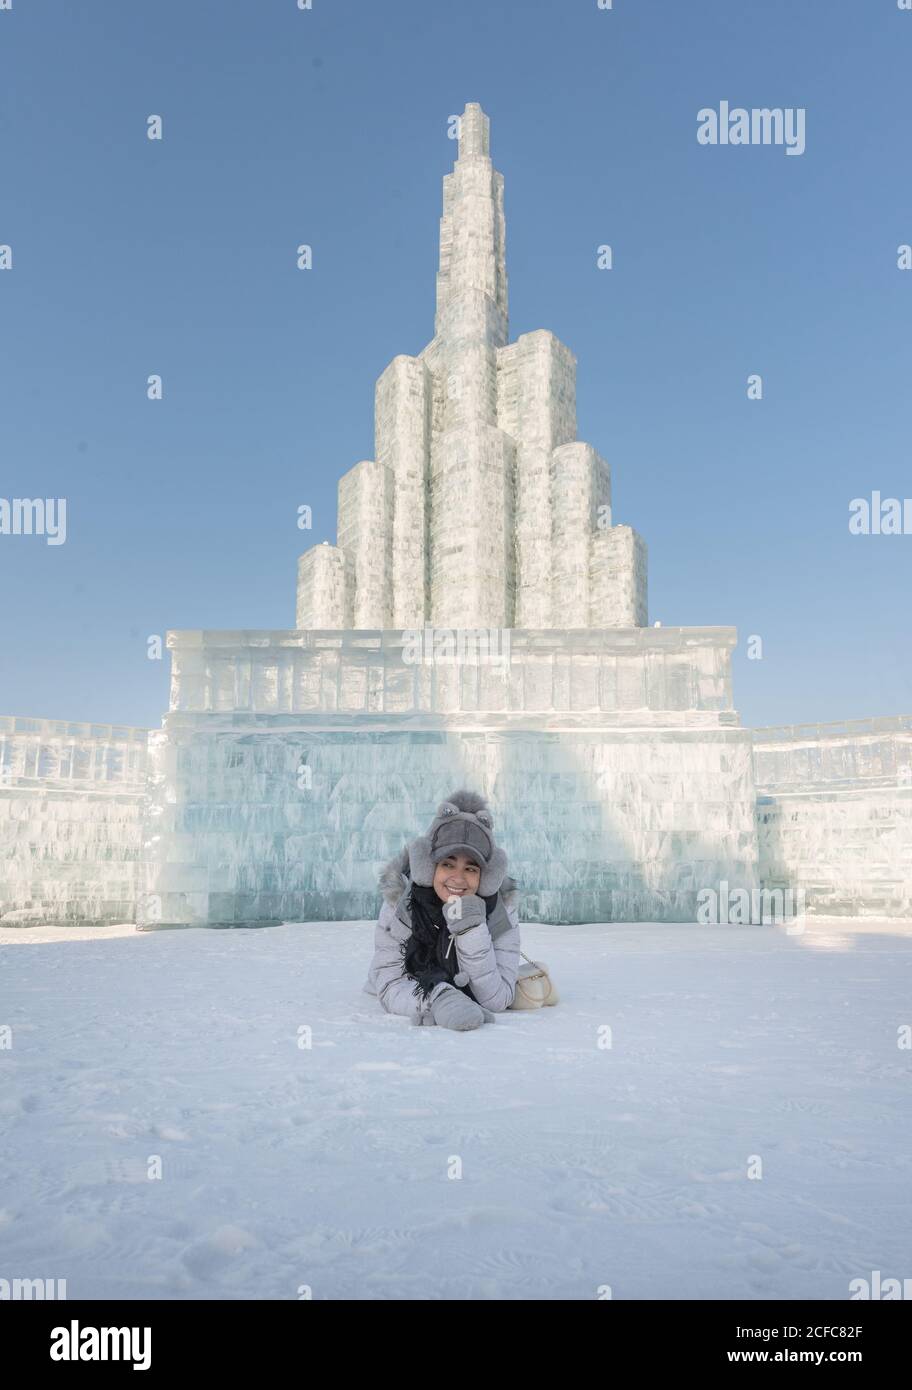 Optimistic Woman in outwear smiling and lying on snow against ice building on cloudless day in winter Stock Photo